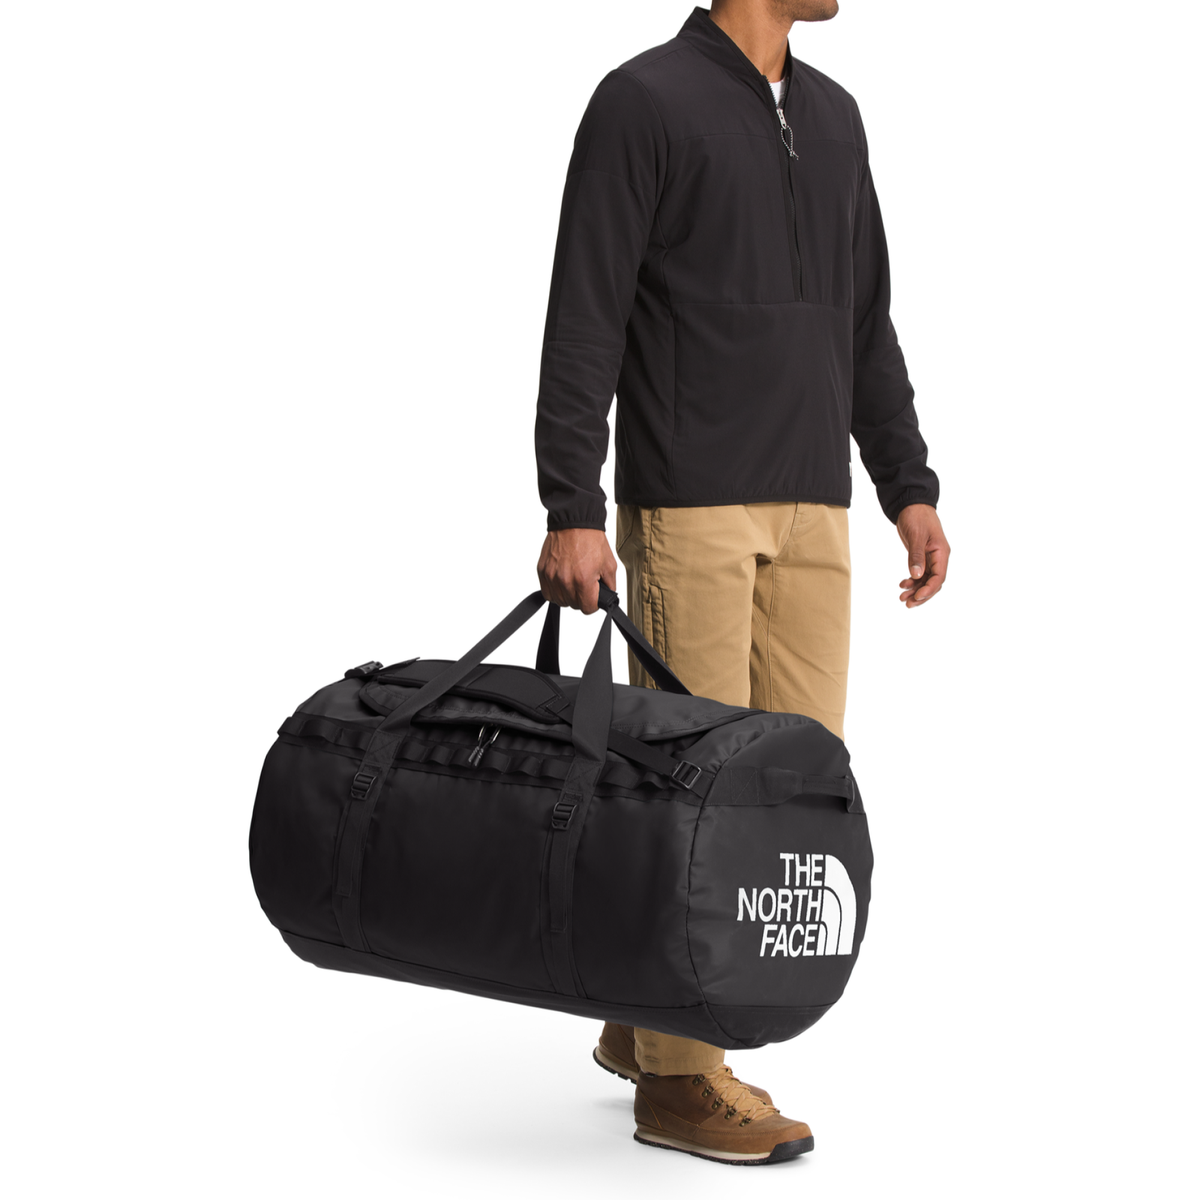 The North Face Sac Base Camp Duffel XL Adulte – Oberson